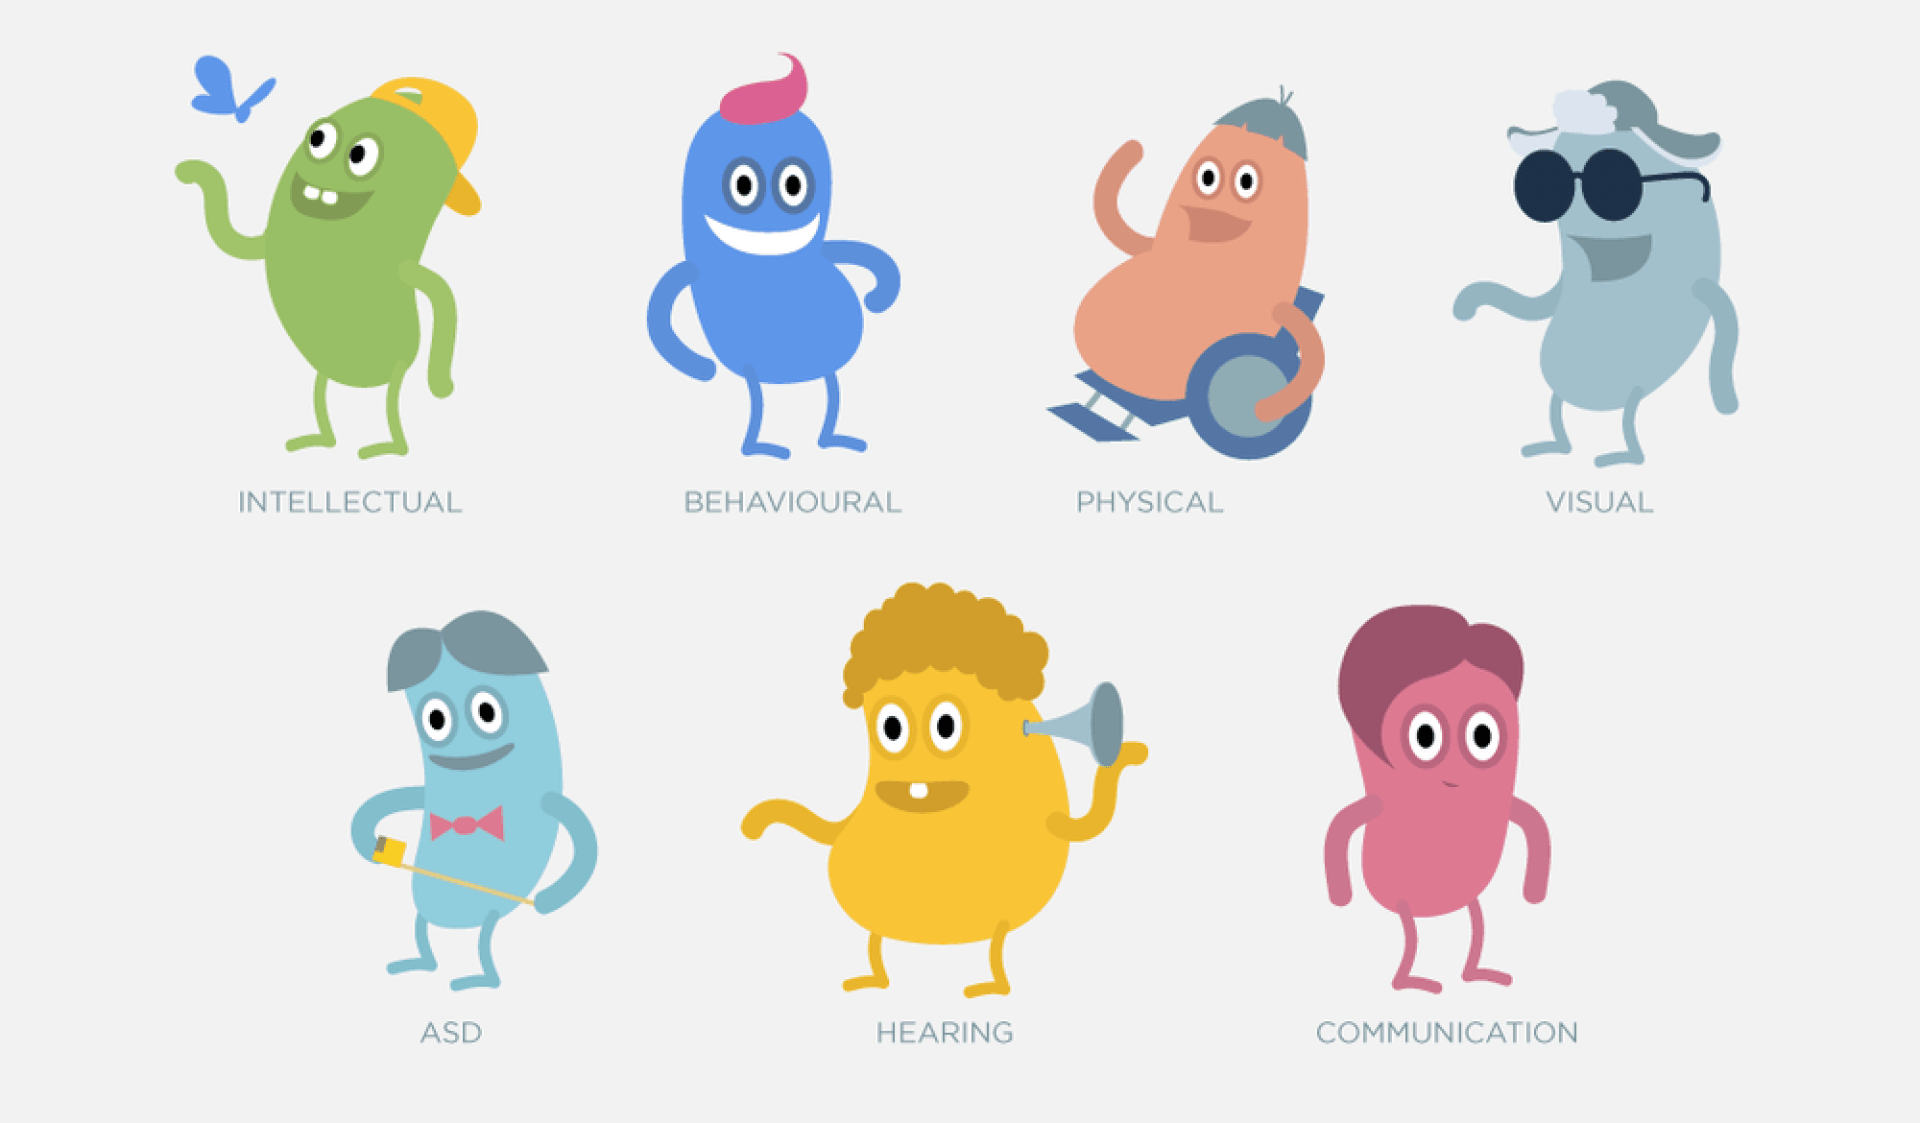 A group of illustrated characters for different personalities